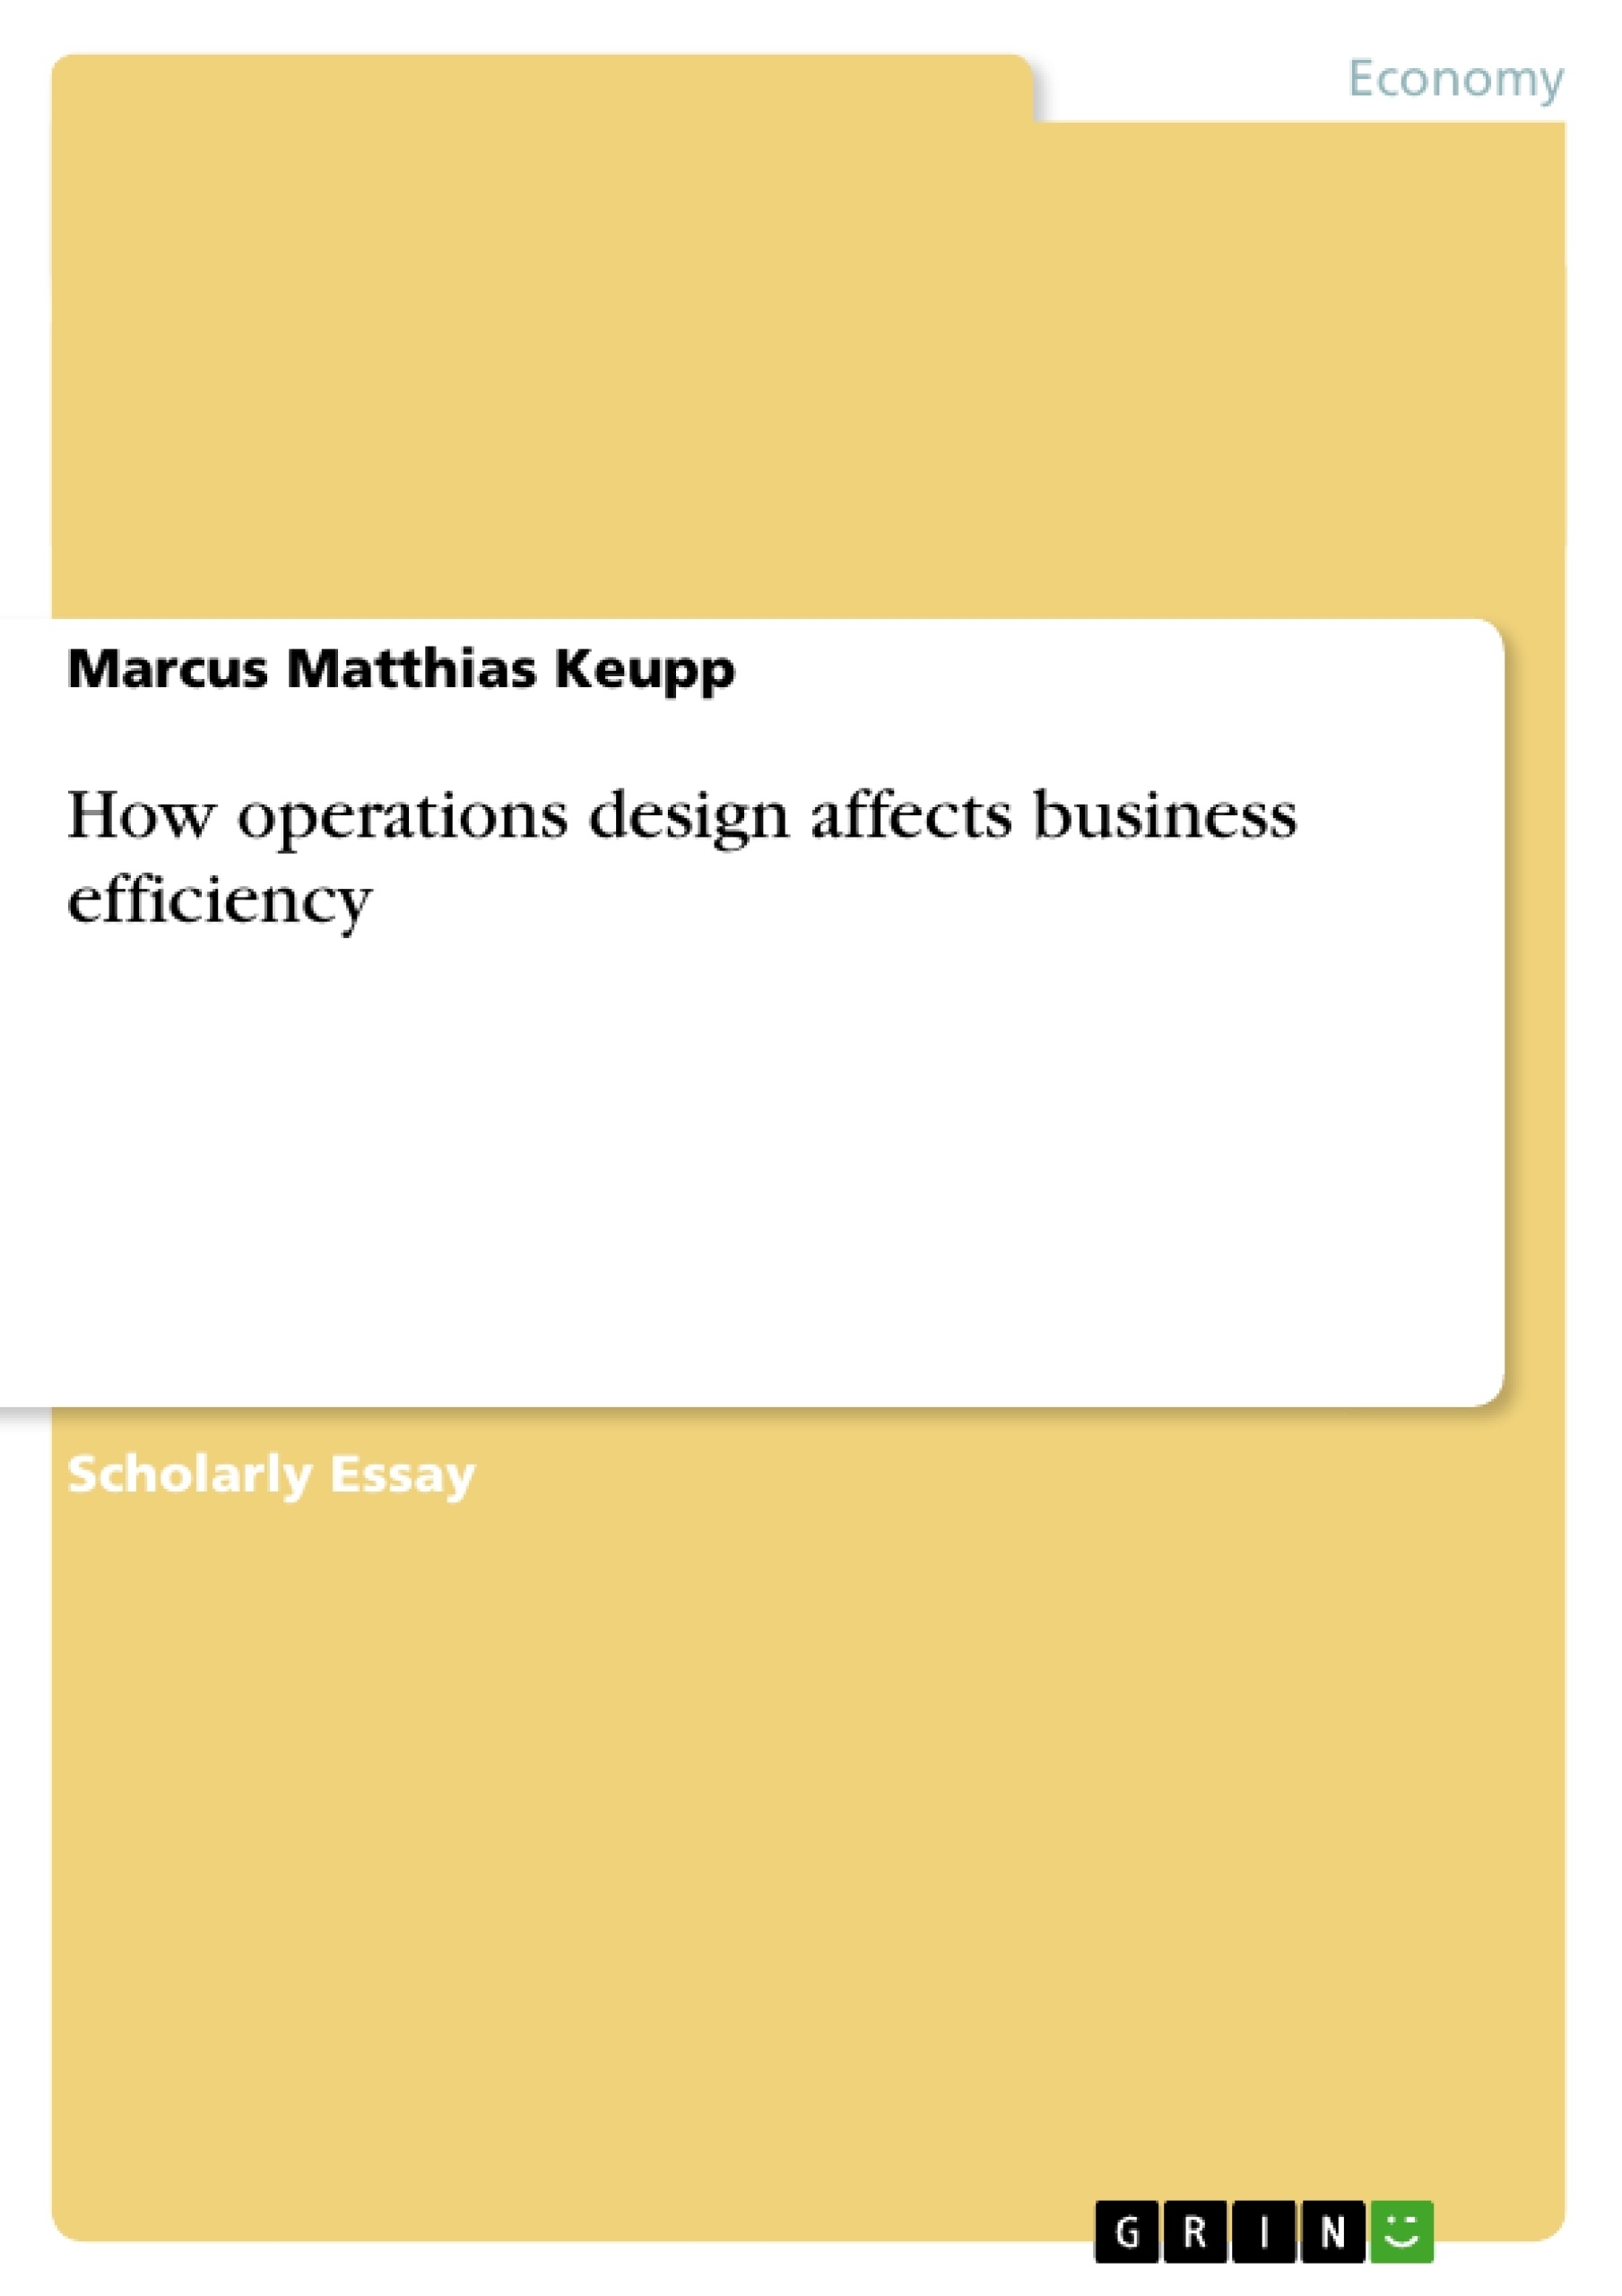 Title: How operations design affects business efficiency